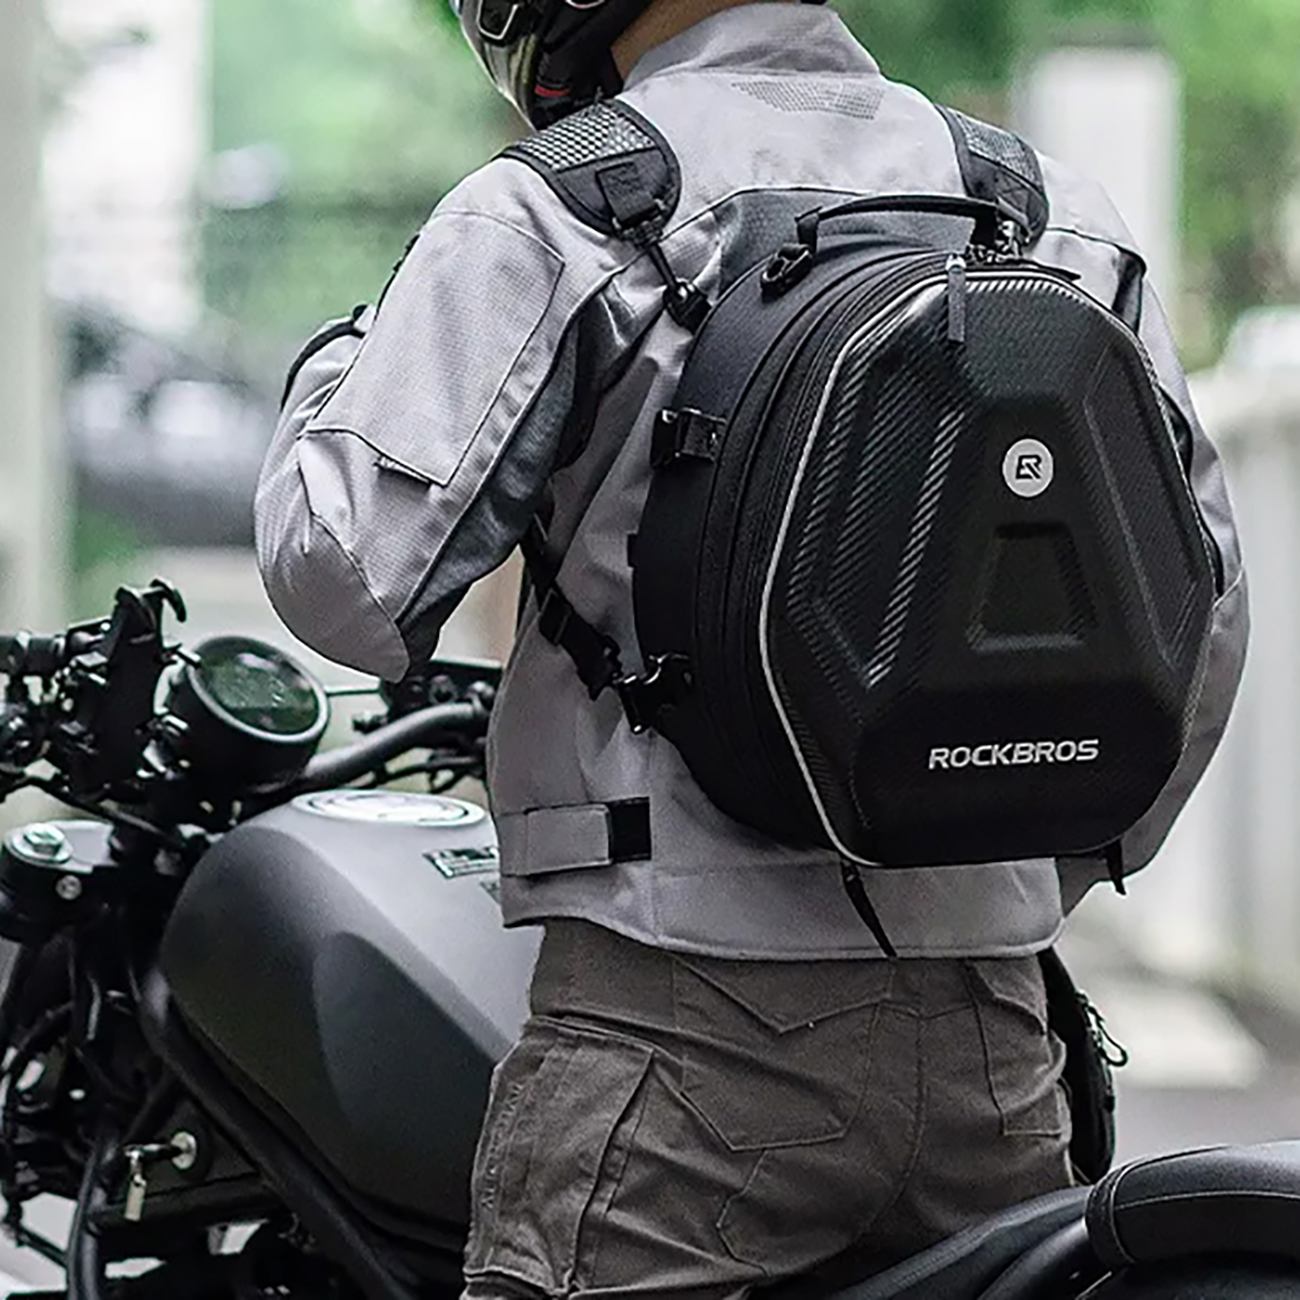 A man standing next to a motorcycle wearing a helmet and wearing a Rockbros backpack 30140026001